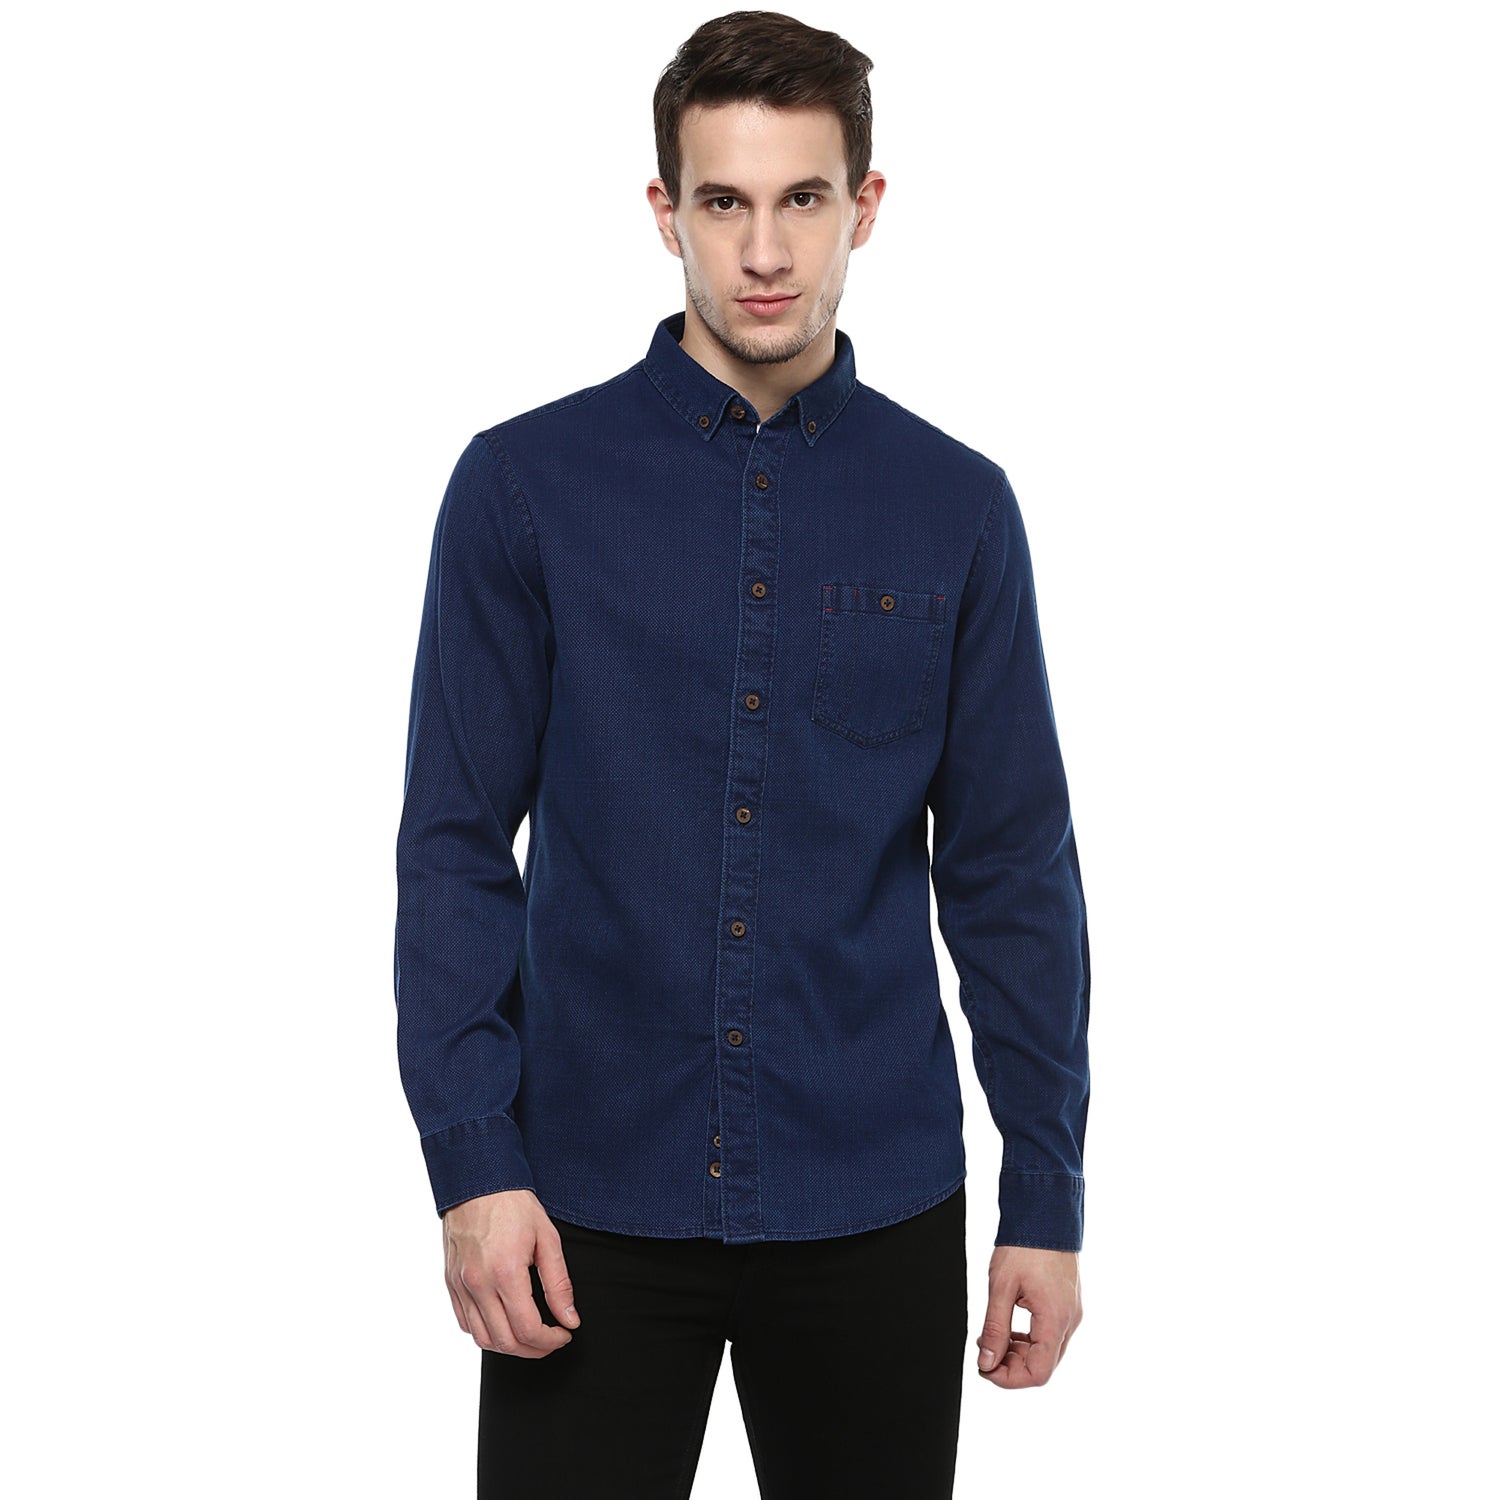 Navy Blue Regular Fit Solid Casual Shirt (LARELIEF)